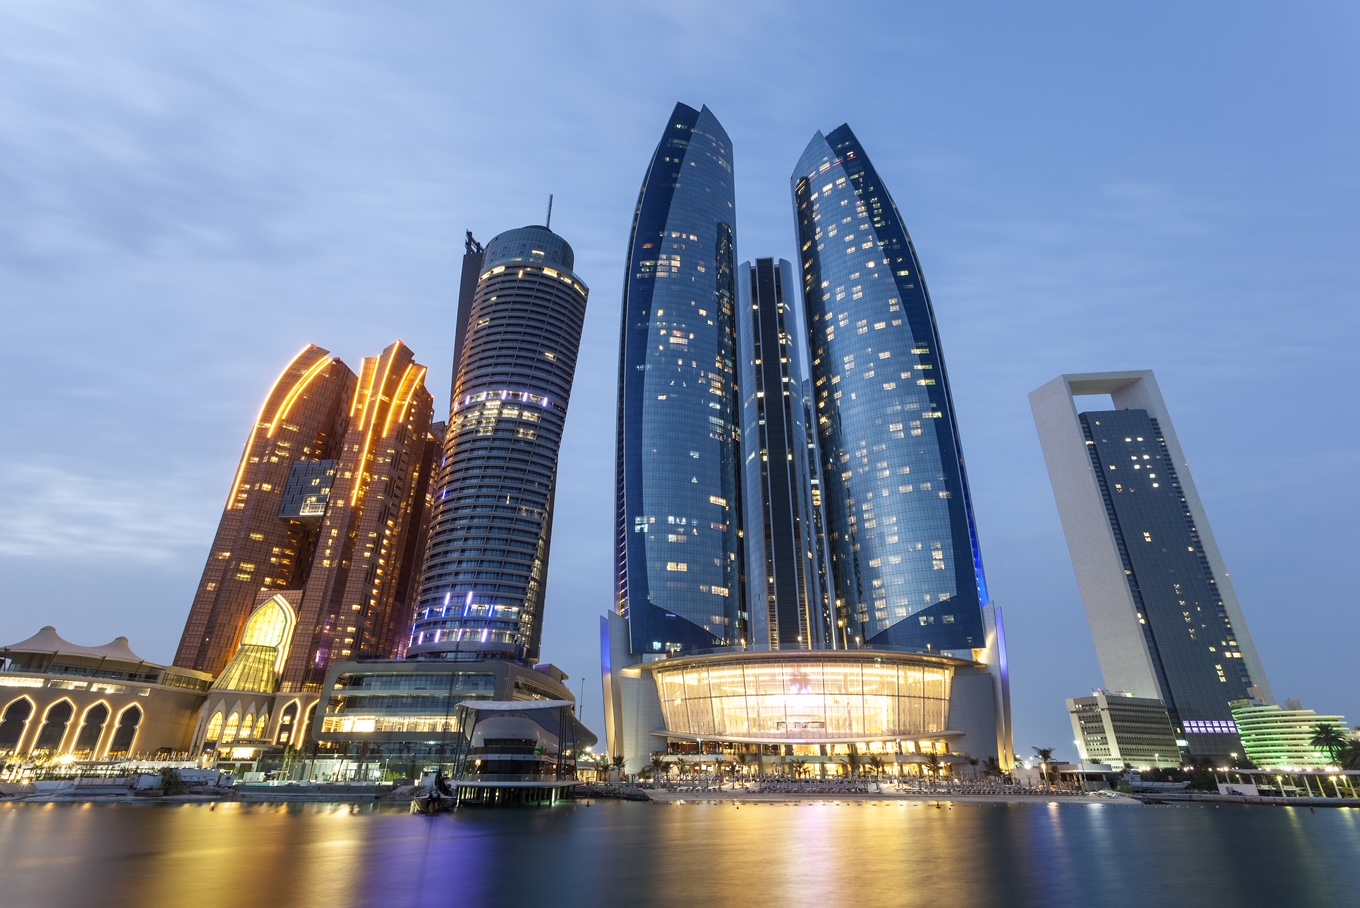 Destination Abu Dhabi Digital Portal Attracts Thousands Of Potential Investors, Entrepreneurs And Future Residents